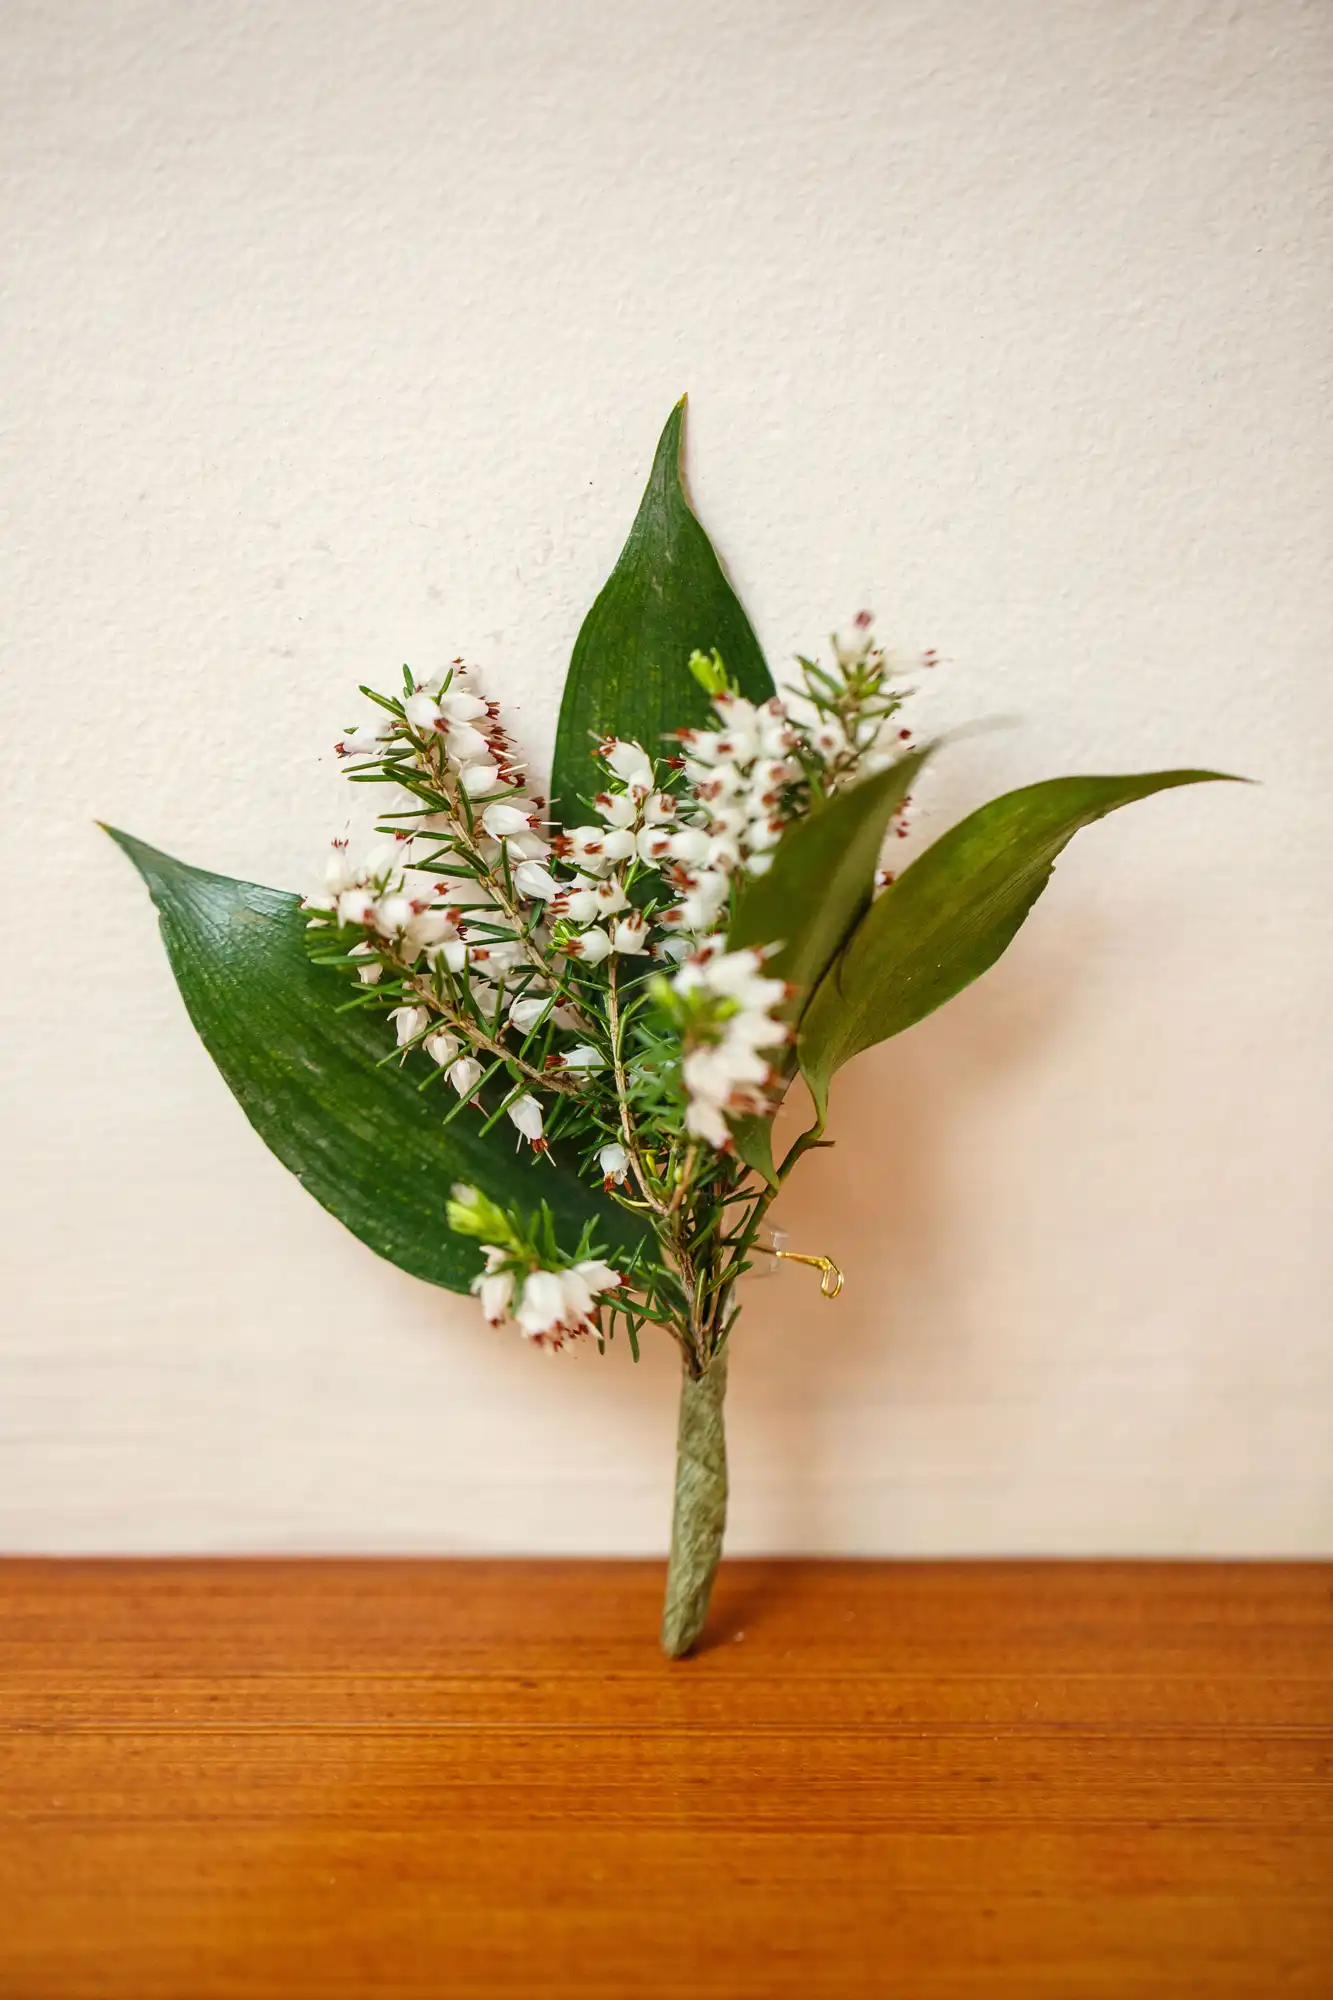 Small bouquet of white bell-shaped flowers and green leaves, wrapped in a leaf, standing on a wooden surface against a white wall.